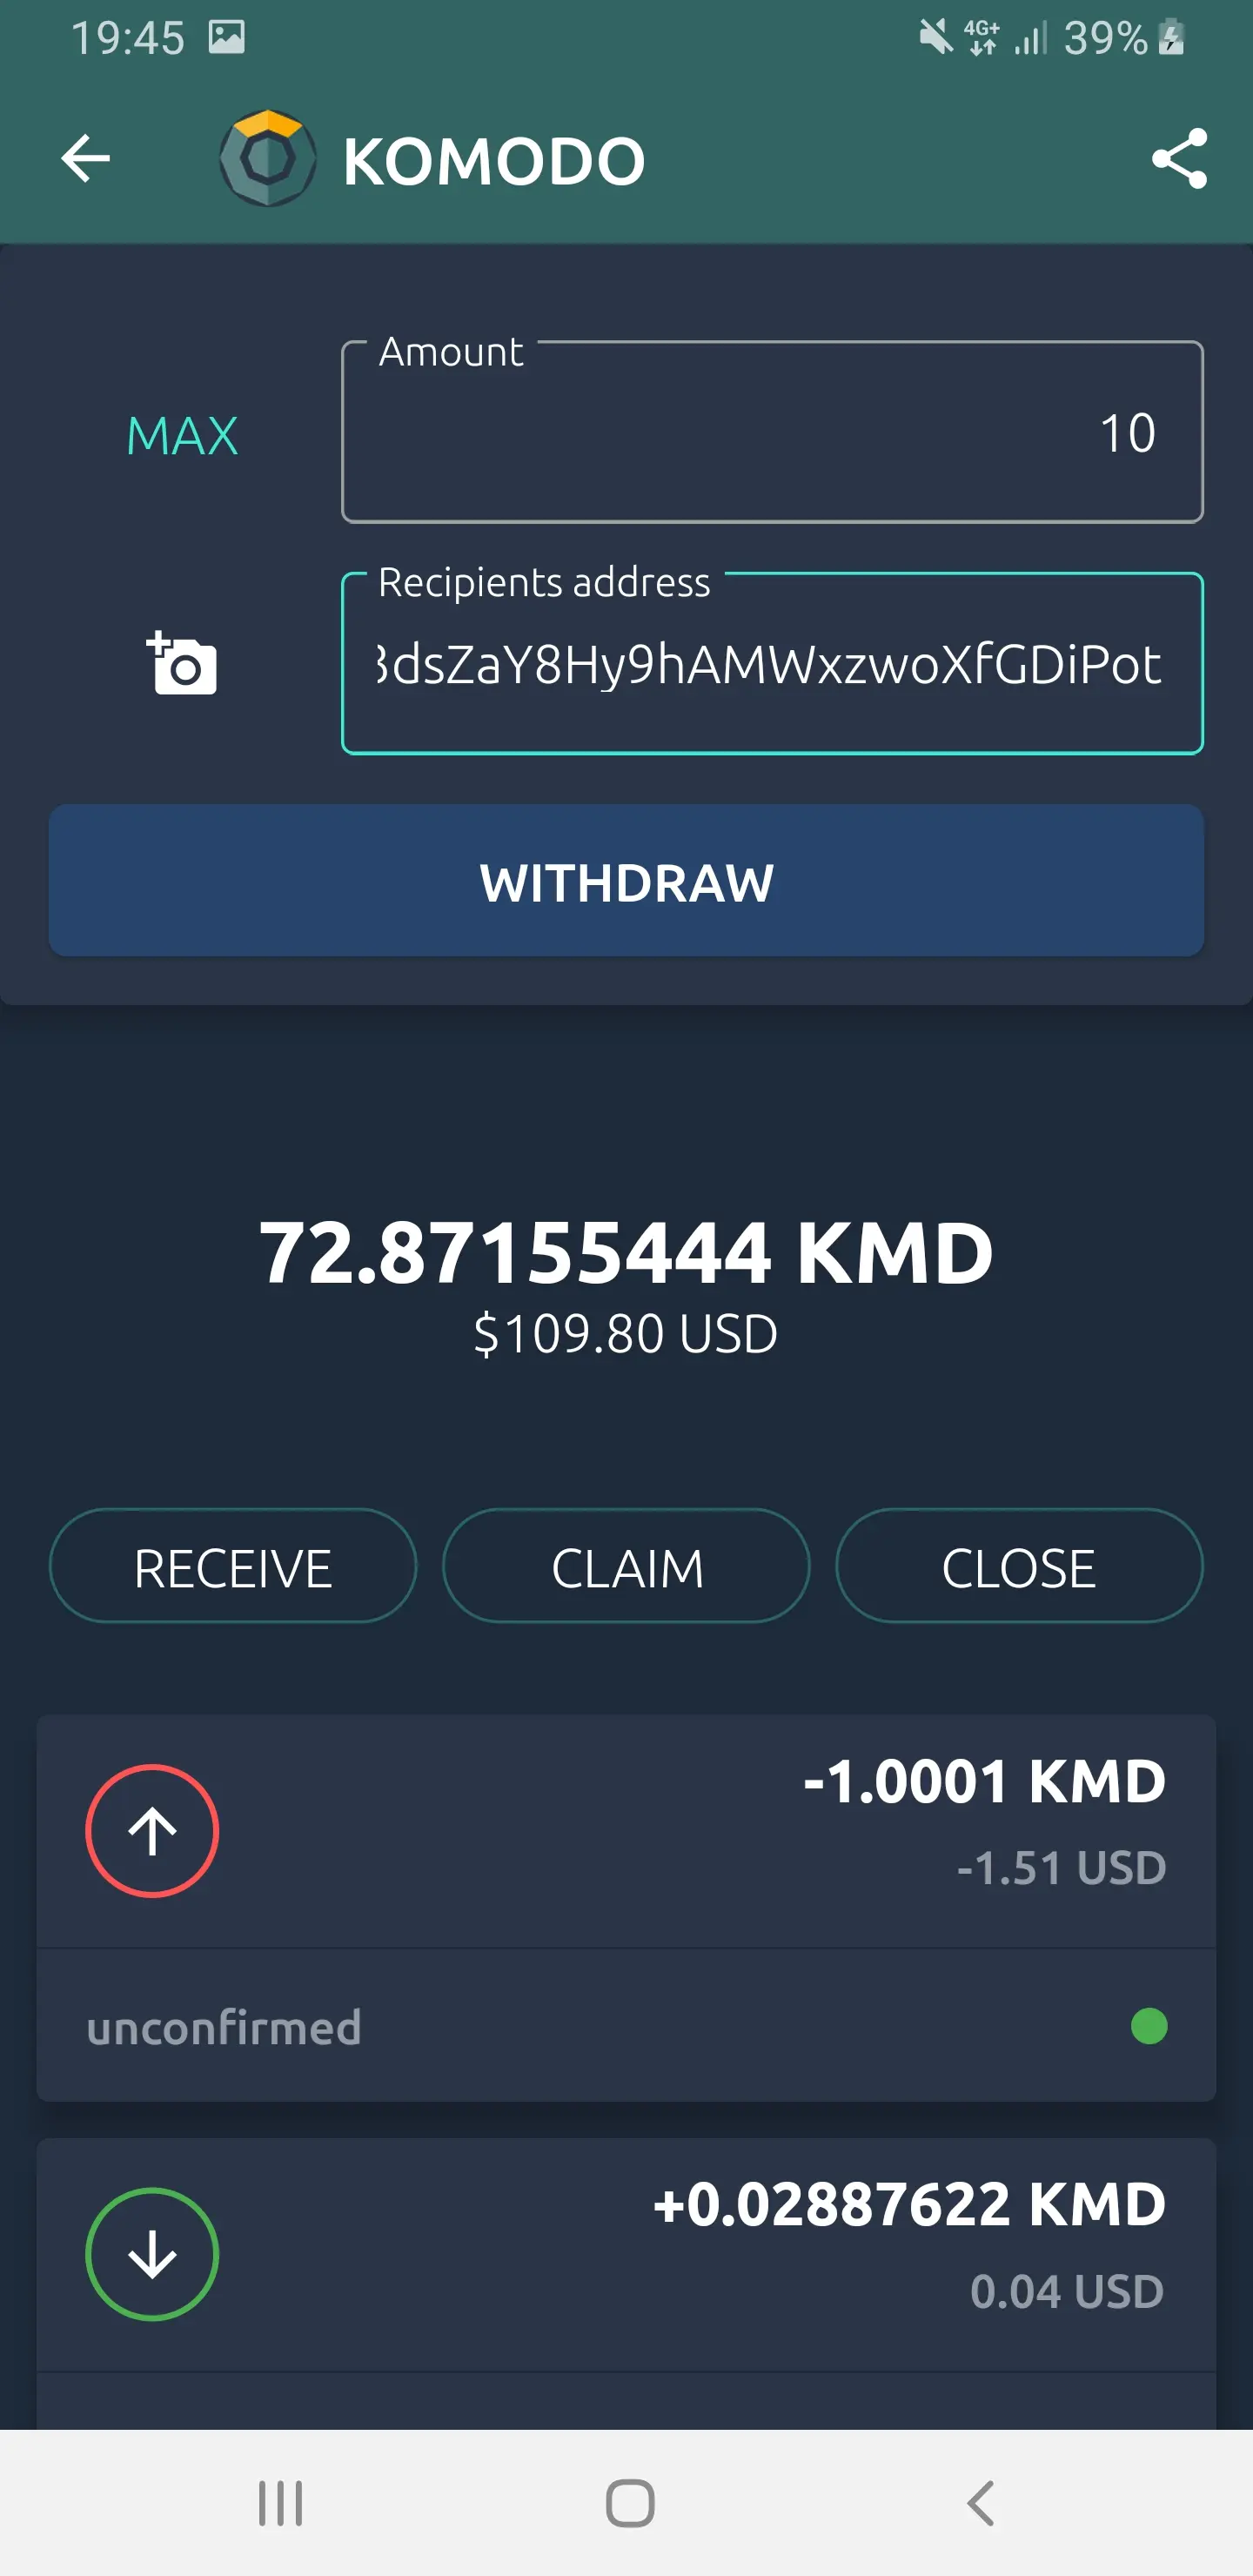  How to Withdraw or Send Funds Using Komodo Mobile Wallet